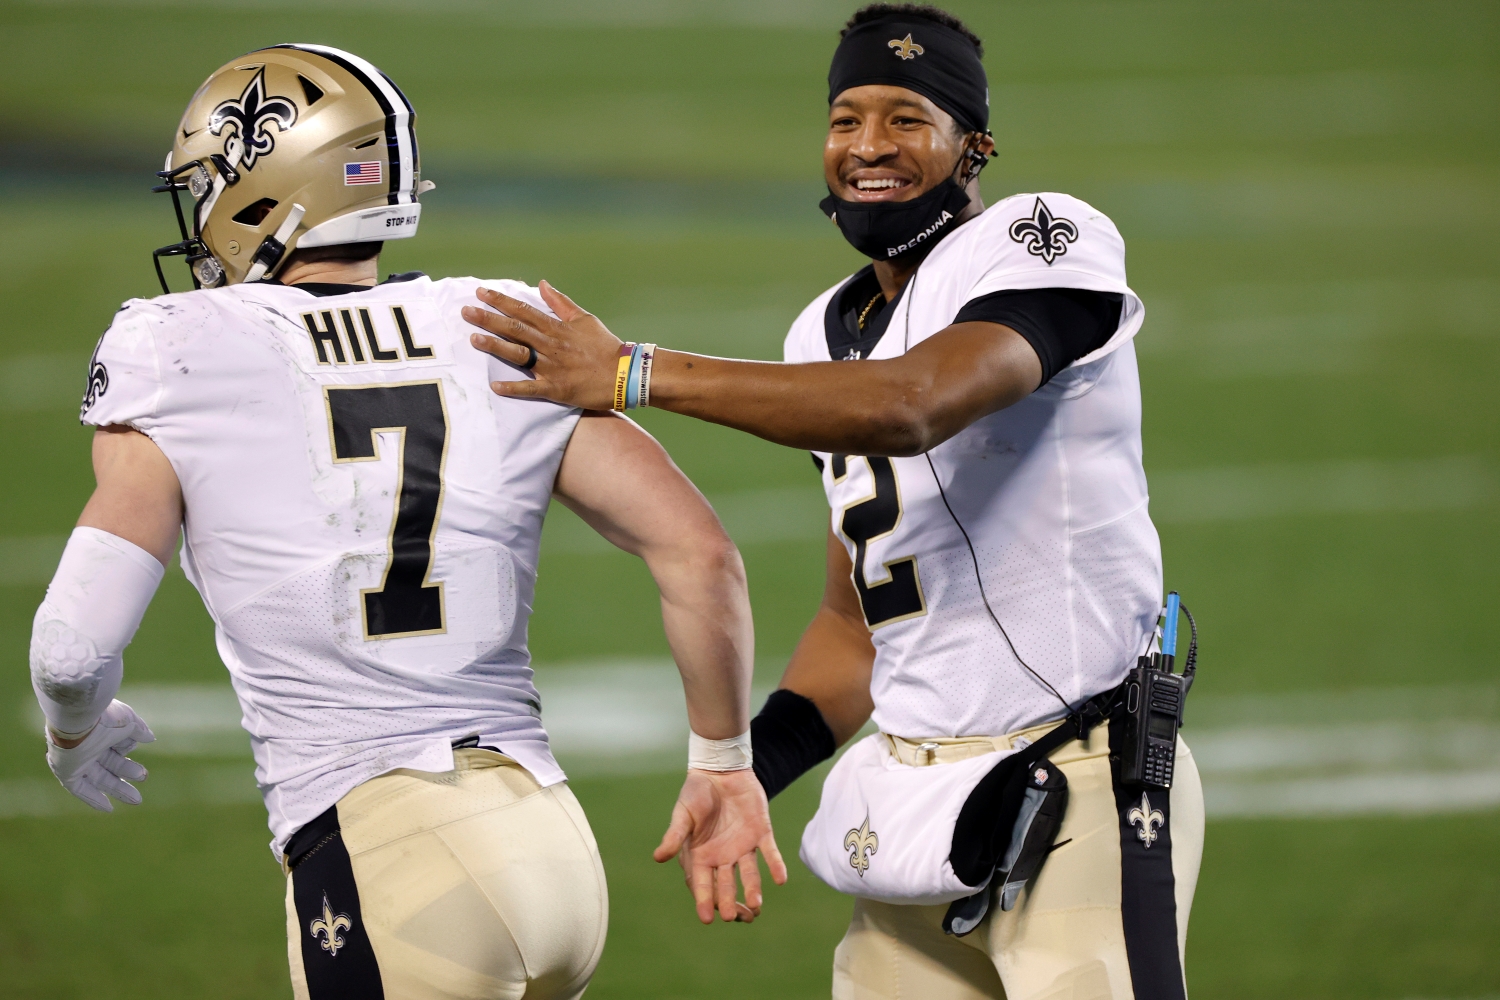 The Latest Report on the Saints’ Starting Quarterback Situation Should Make New Orleans Fans Nervous About the Future